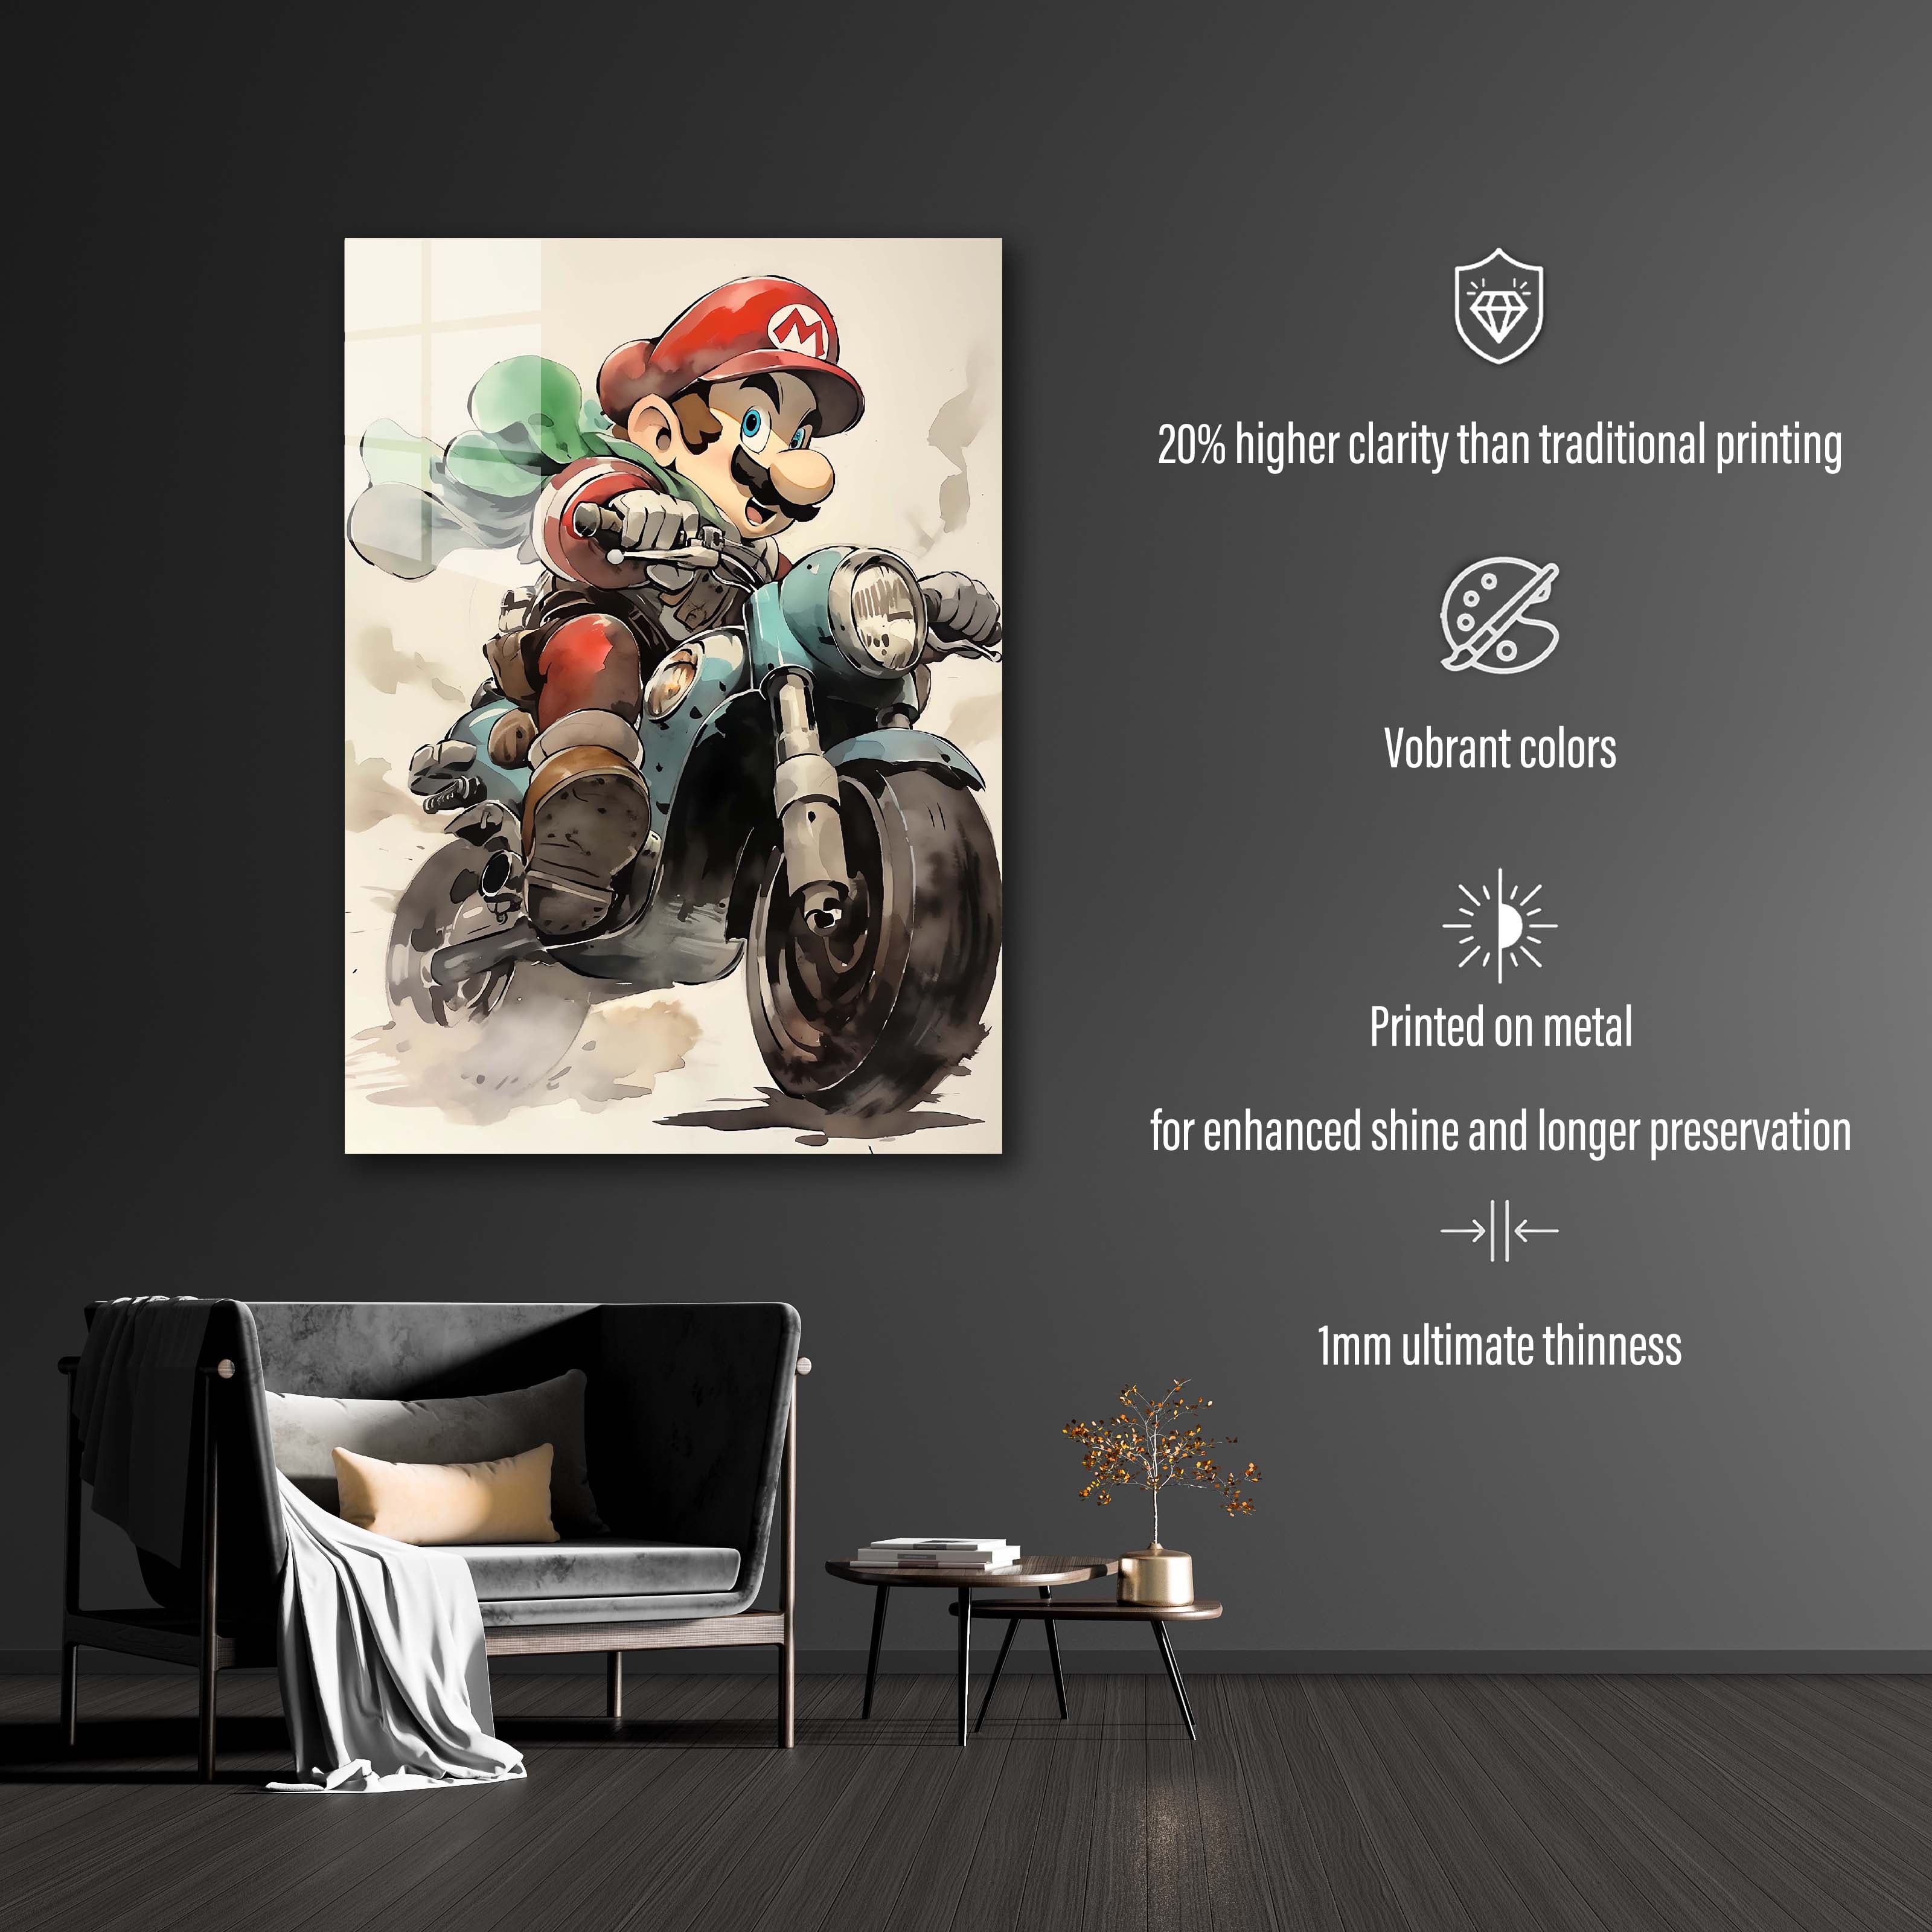 Motorcycle Rider - Mario-designed by @WowPaper